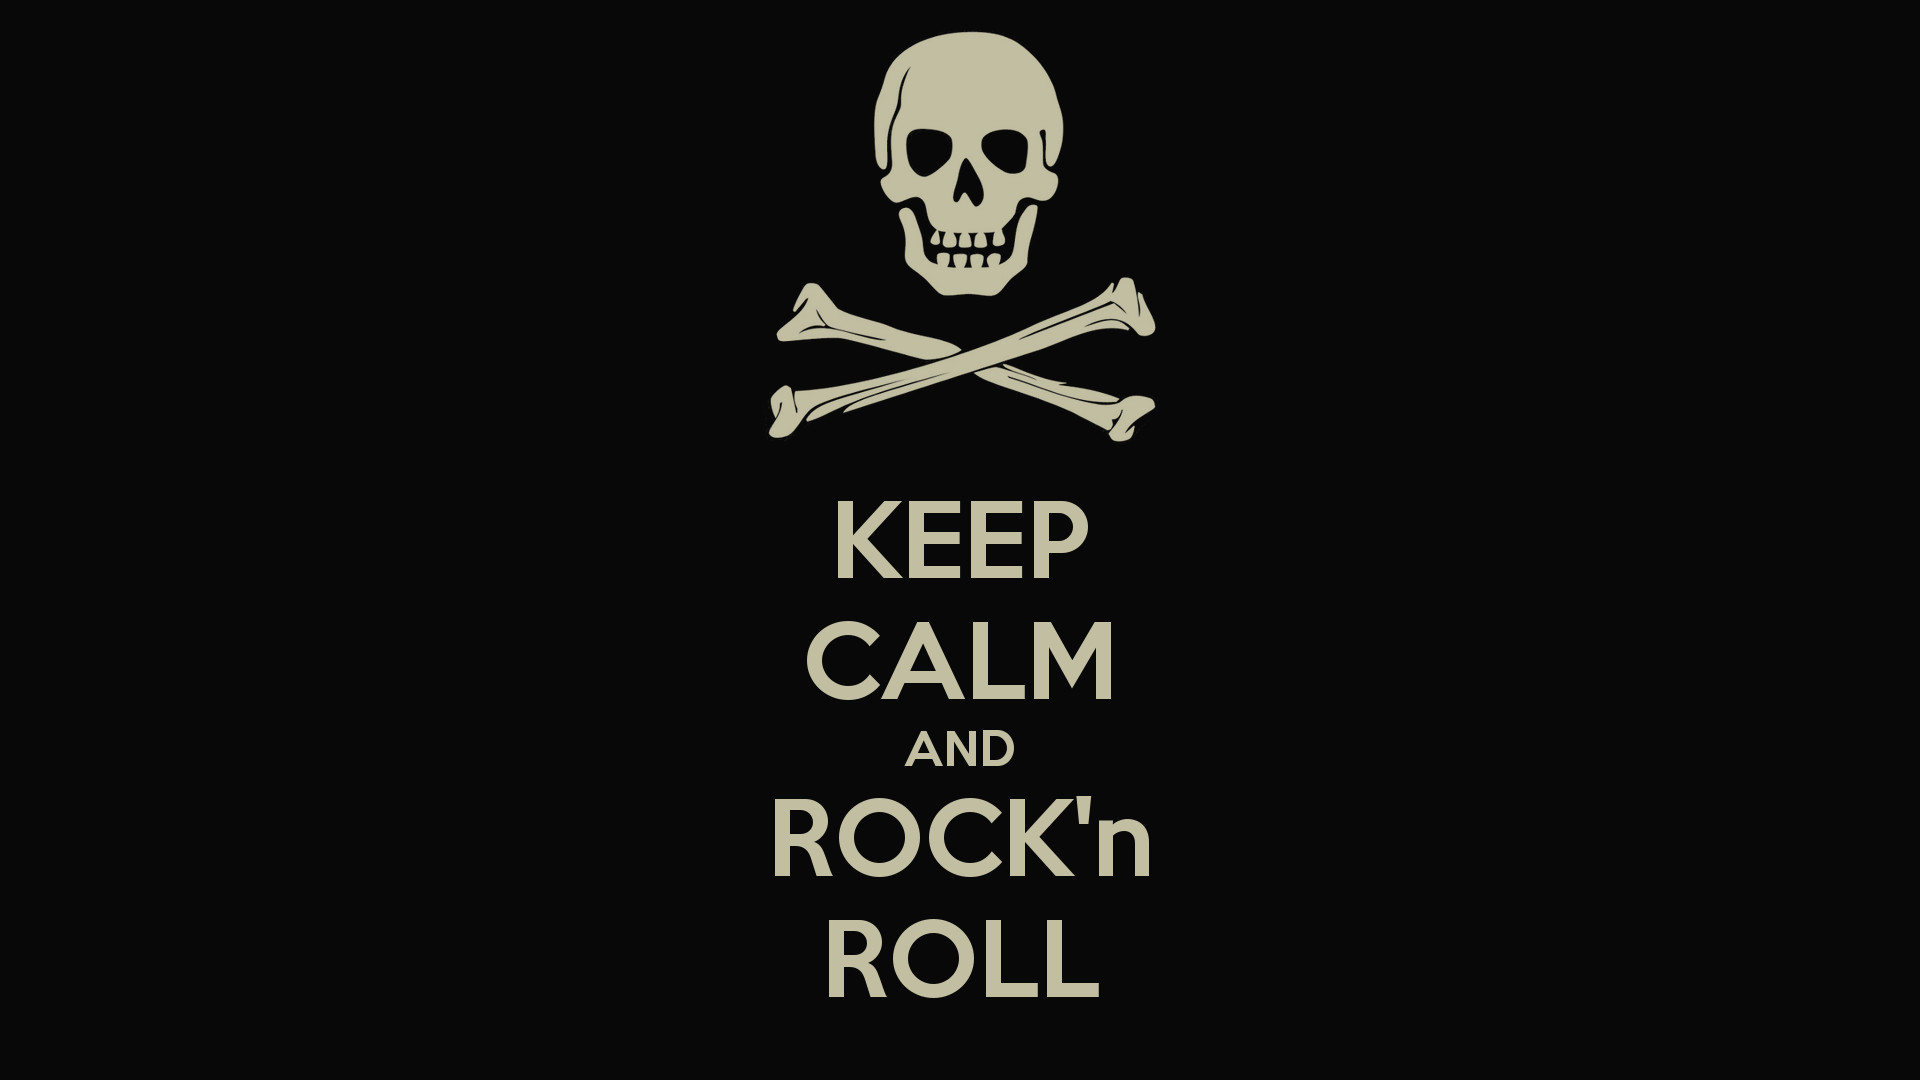 1920x1080  rock and roll wallpapers - Pesquisa Google | Rock ! | Pinterest |  Rock music, Music wallpaper and Rock